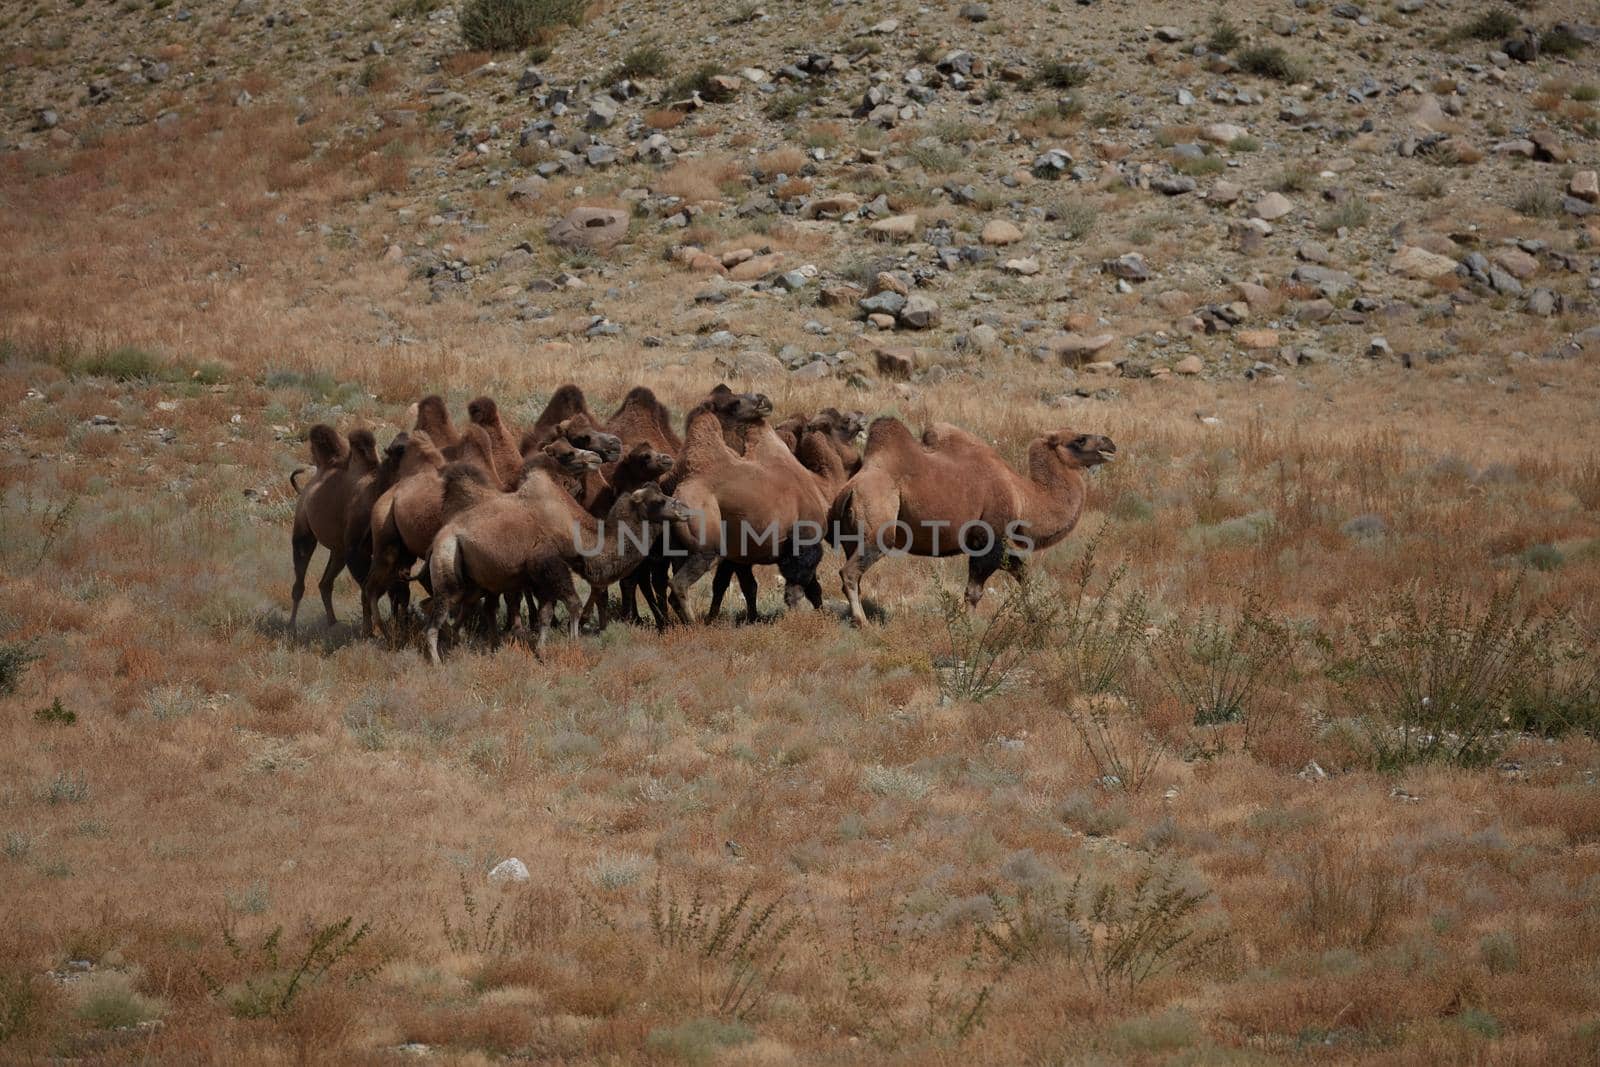 Bactrian Camel in the Gobi desert, Mongolia. A herd of Animals on the pasture.